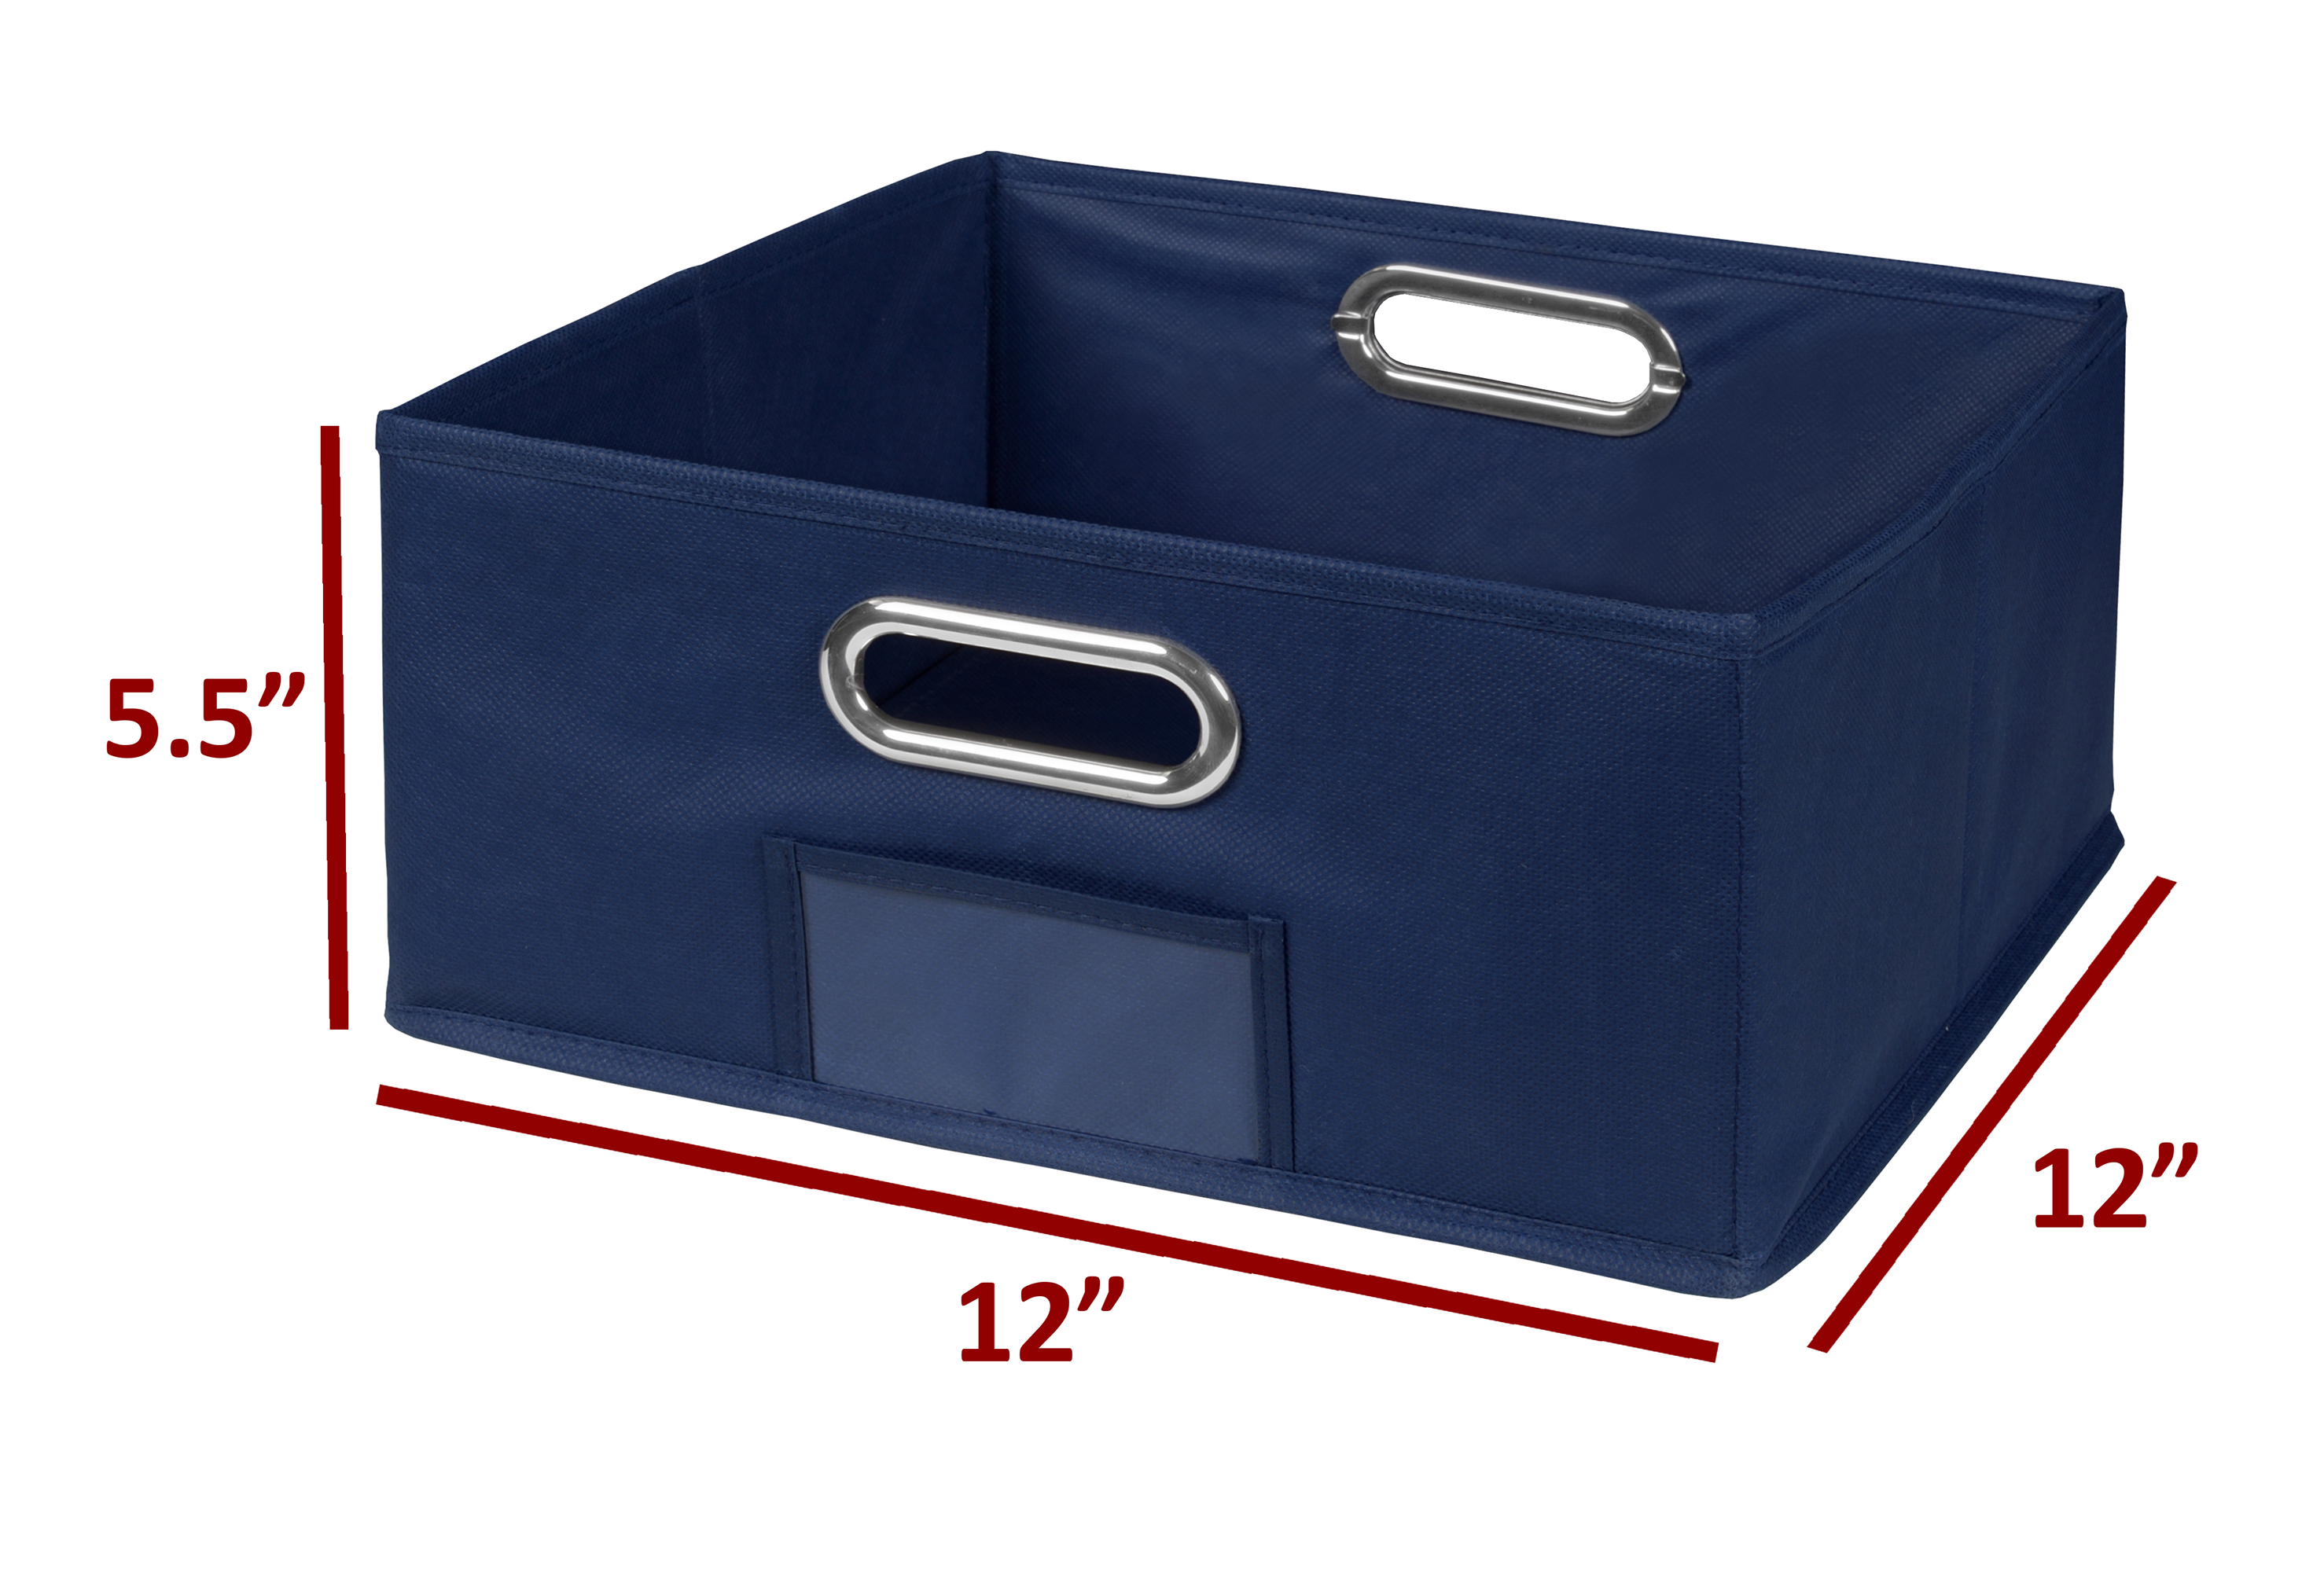 Niche Cubo Storage Set- 6 Full Cubes/3 Half Cubes with Foldable Storage Bins- Truffle/Blue - image 5 of 8